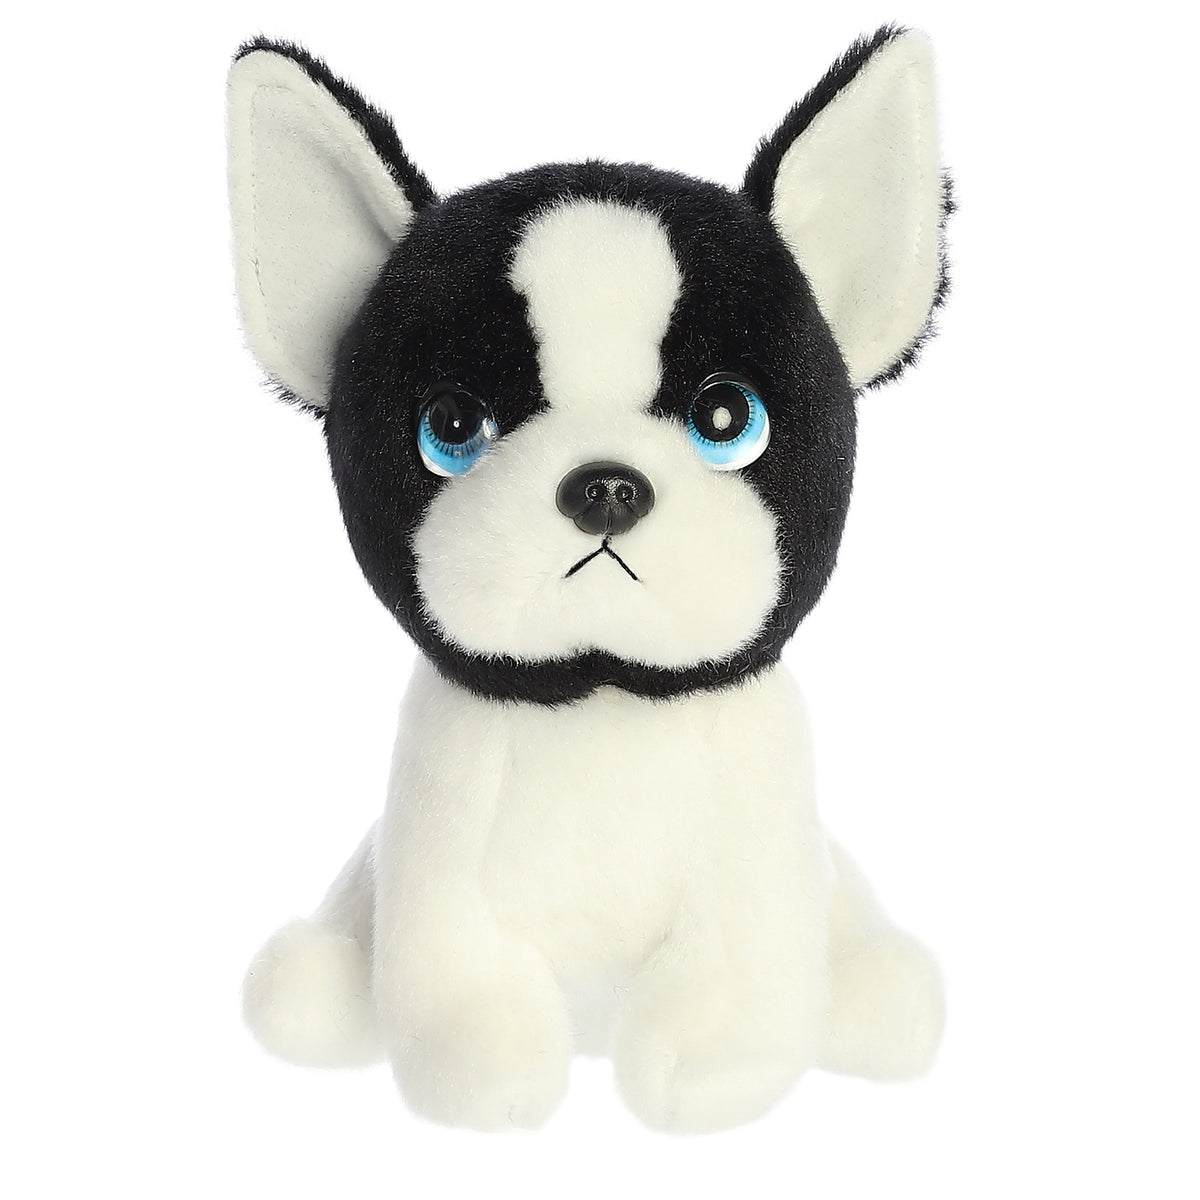 Harvard Boston Terrier plush with a white coat, black face accents, and sparkling eyes from Petites collection by Aurora